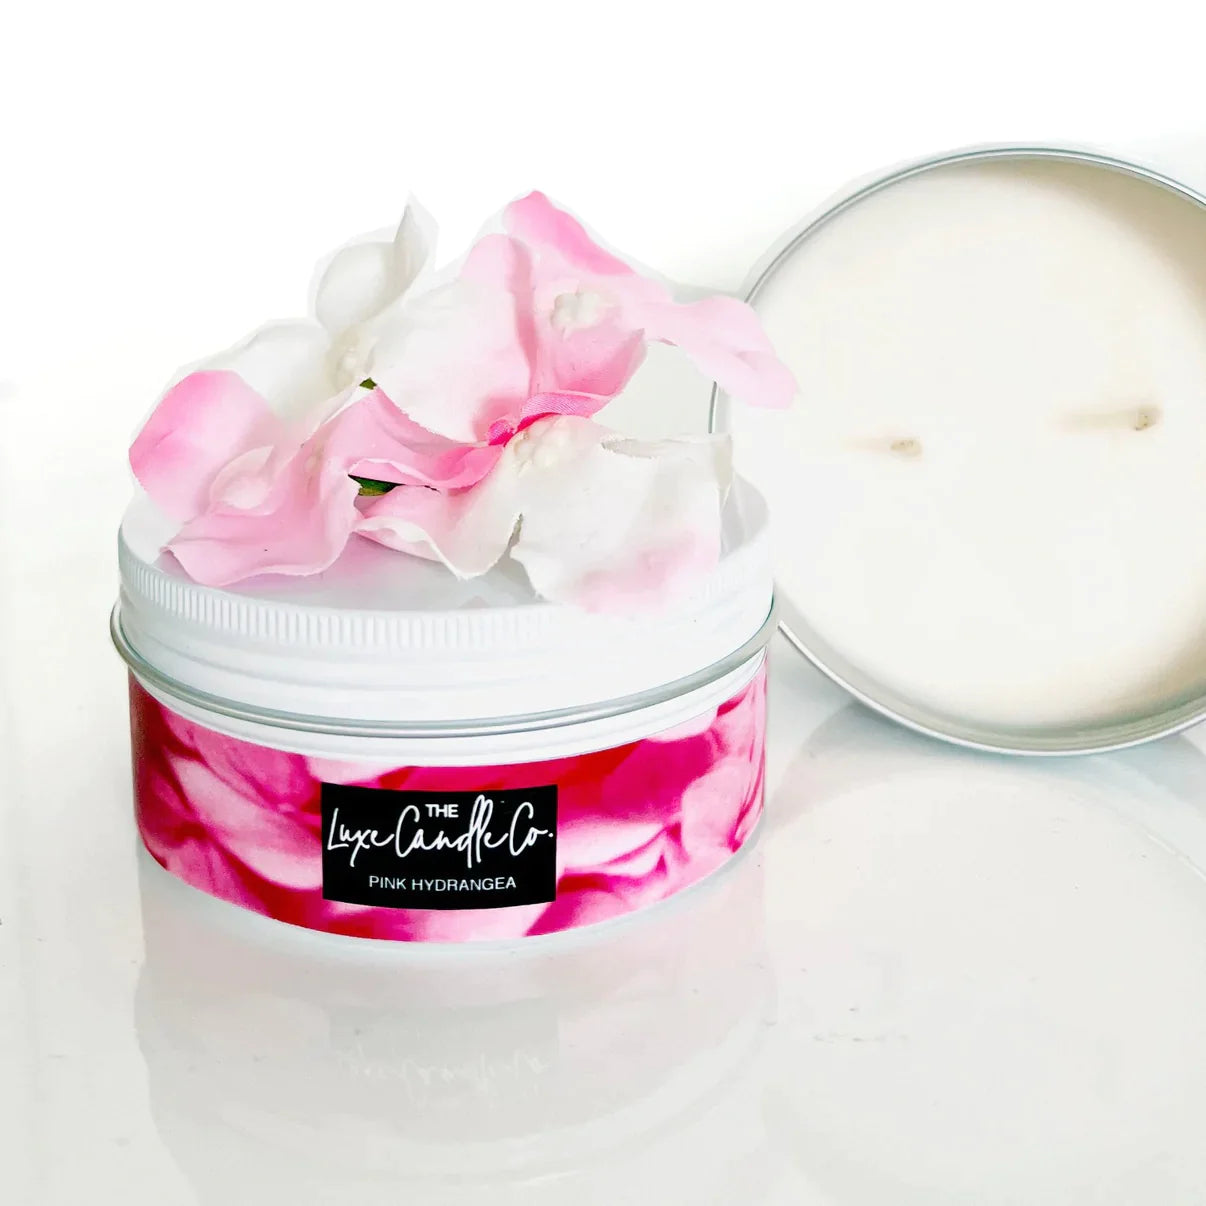 18th birthday gift ideas for Daughter - matching flower scented candle for 18th birthday